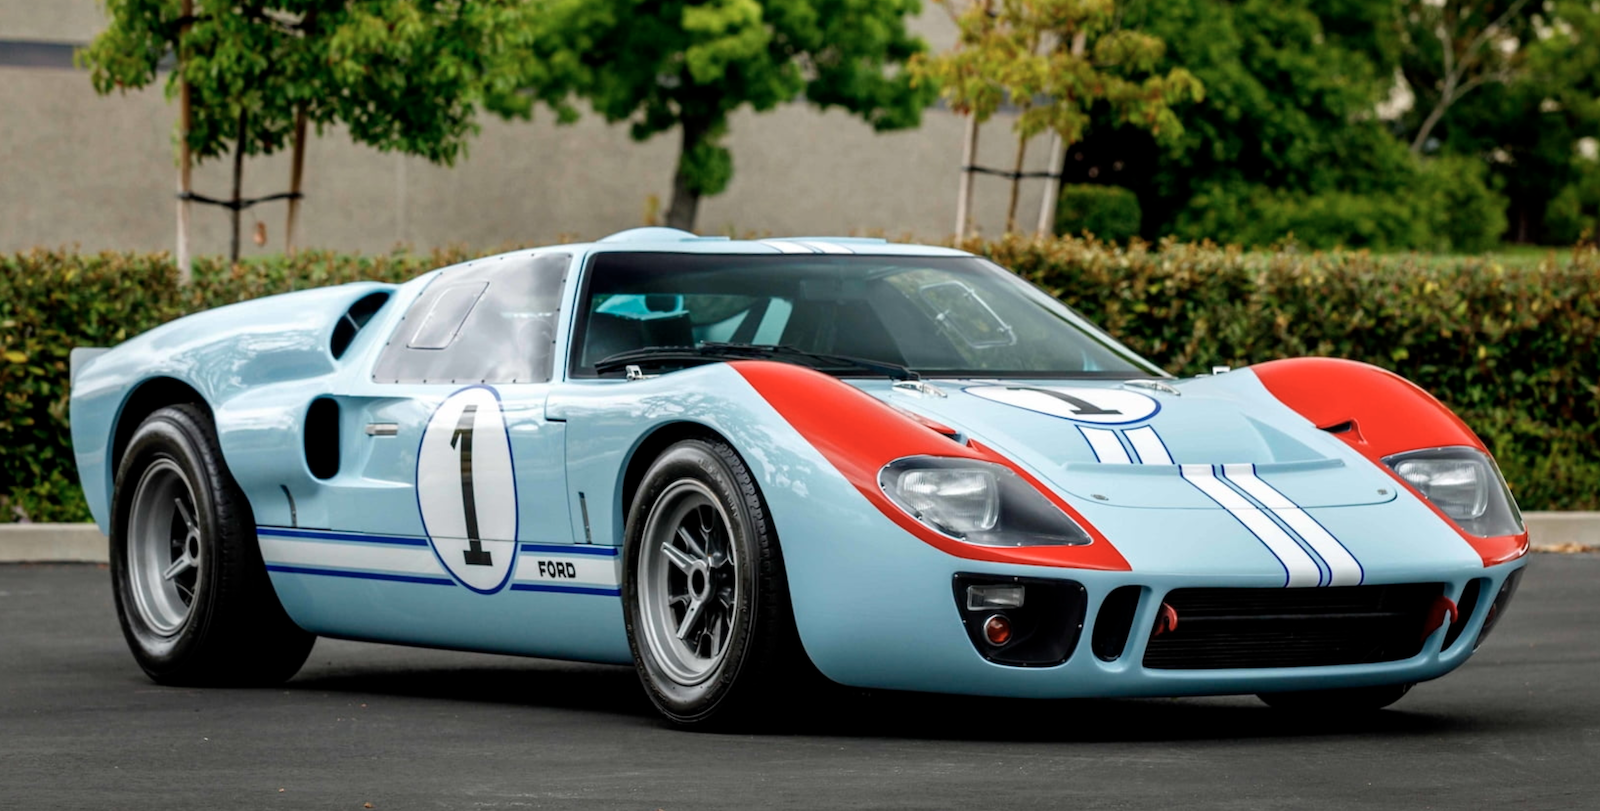 Up For Auction: Ford GT40 by Superformance From the Movie 'Ford v Ferrari'